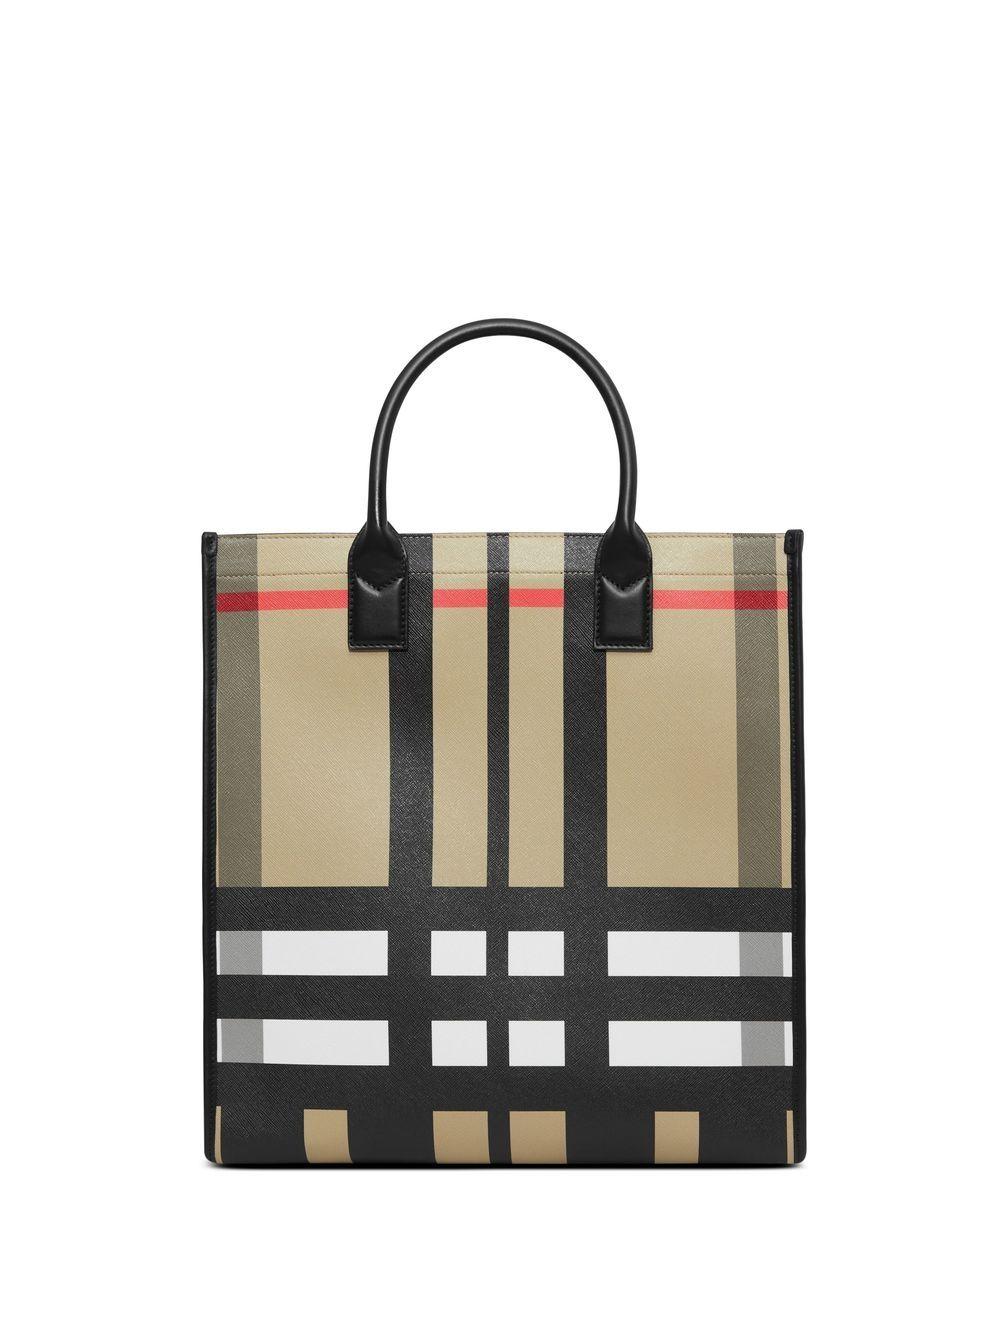 Burberry Classic Check Tote Bag with Black Leather Trim